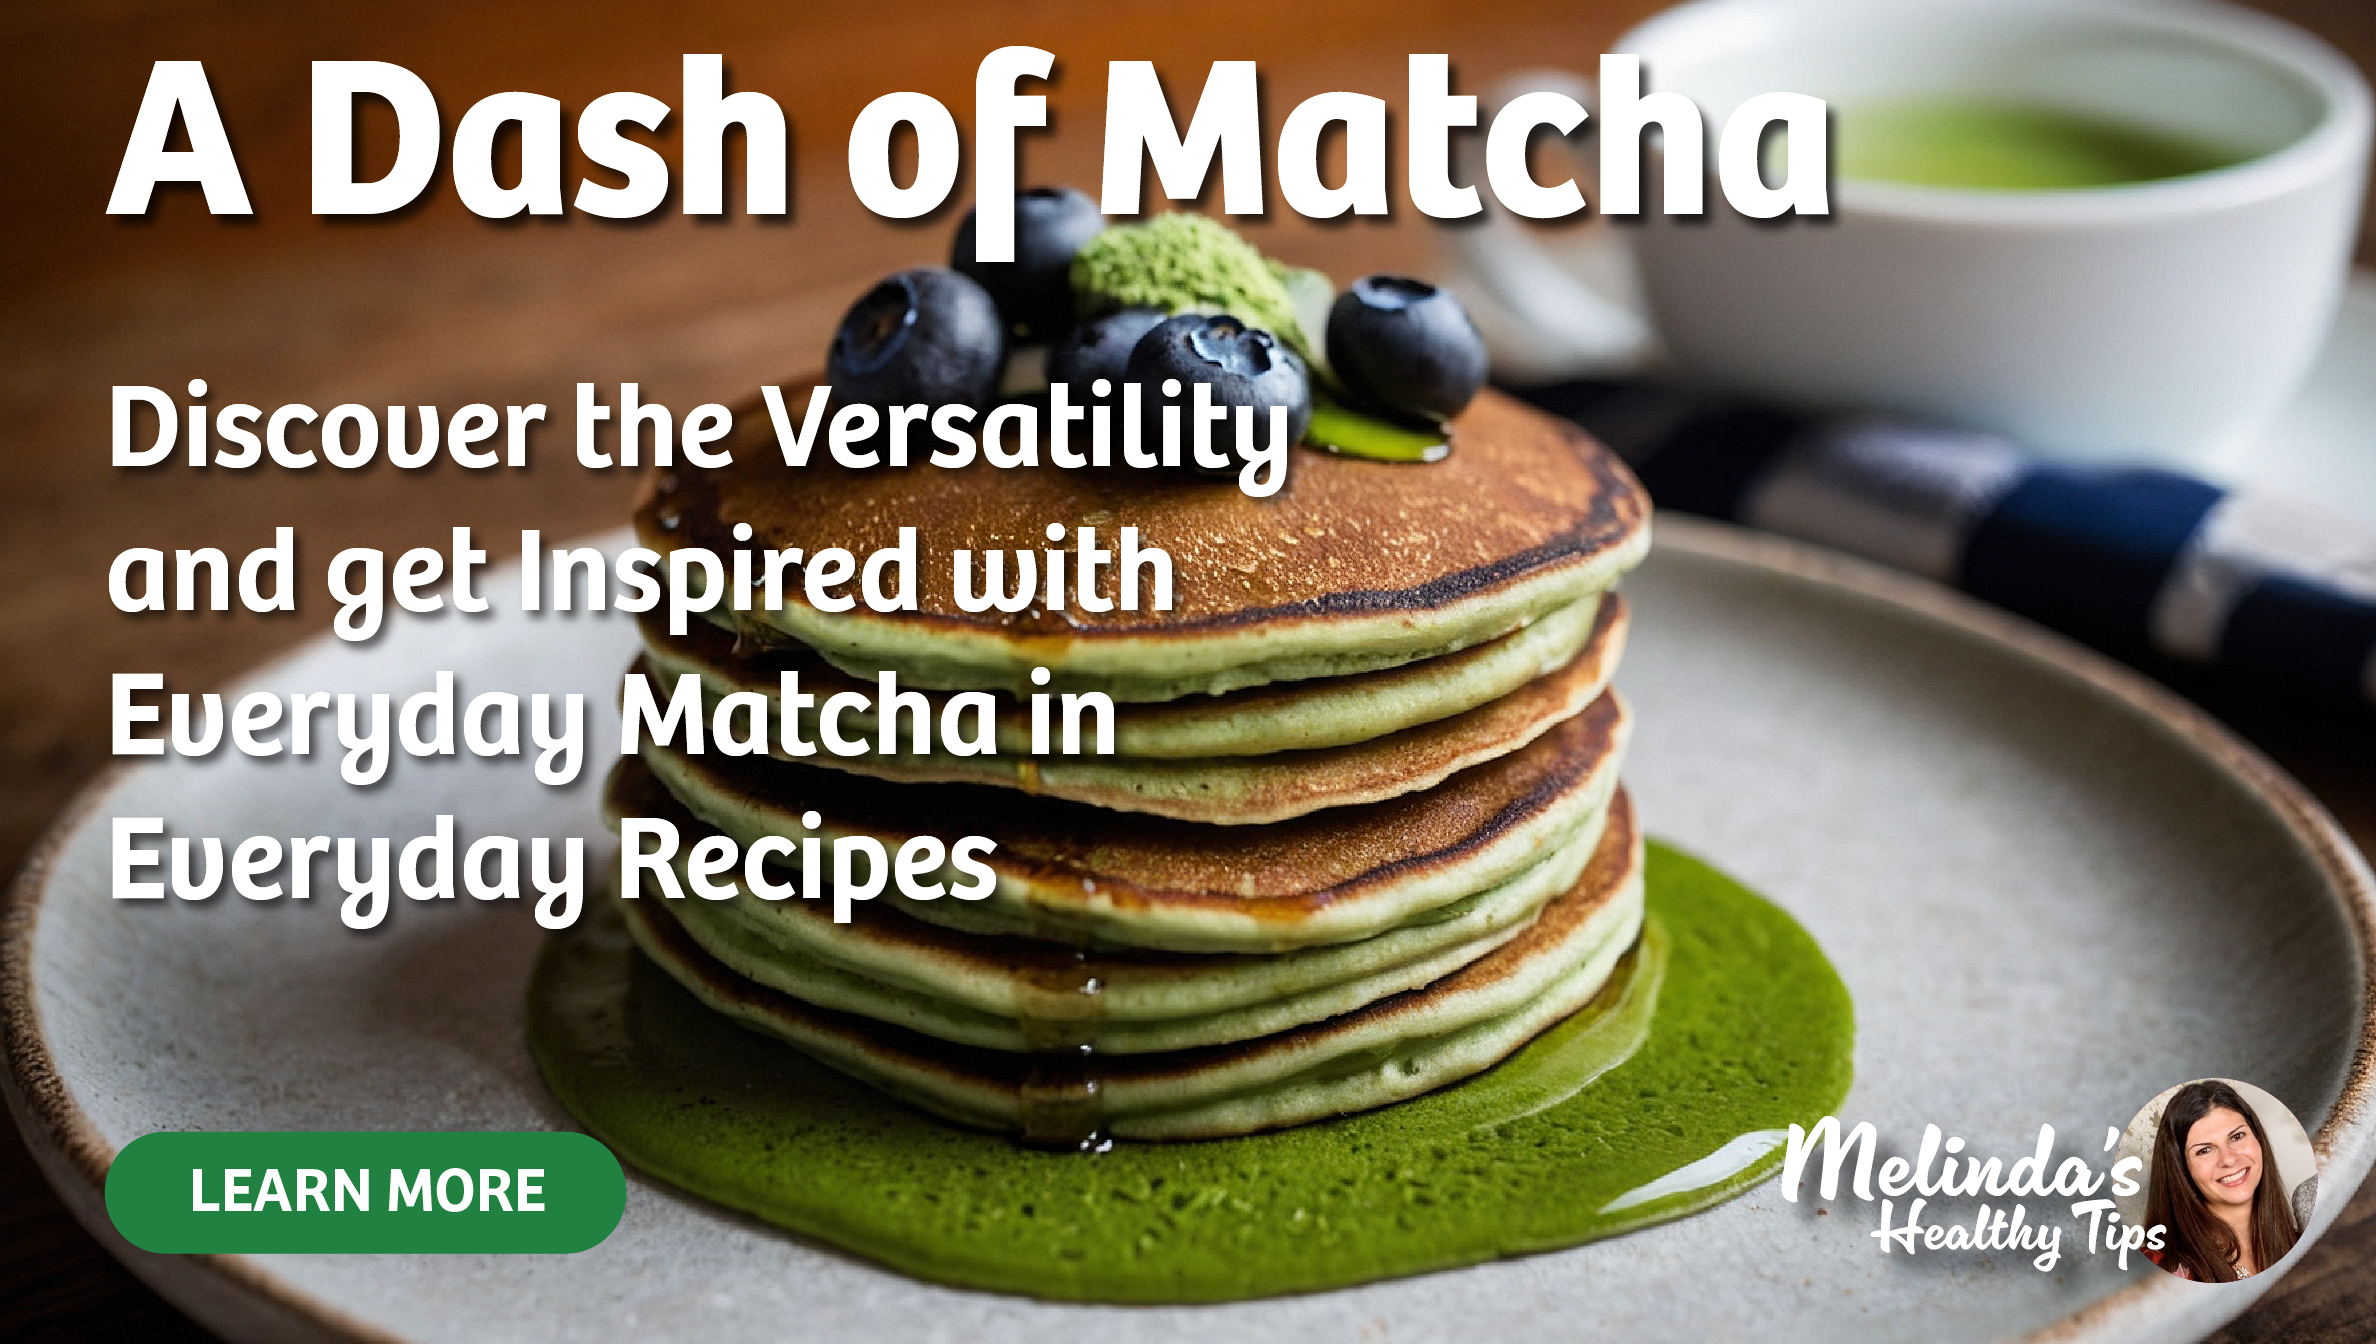 A Dash of Matcha: Discover the Versitility and get Inspired with Everyday Matcha in Everyday Recipes